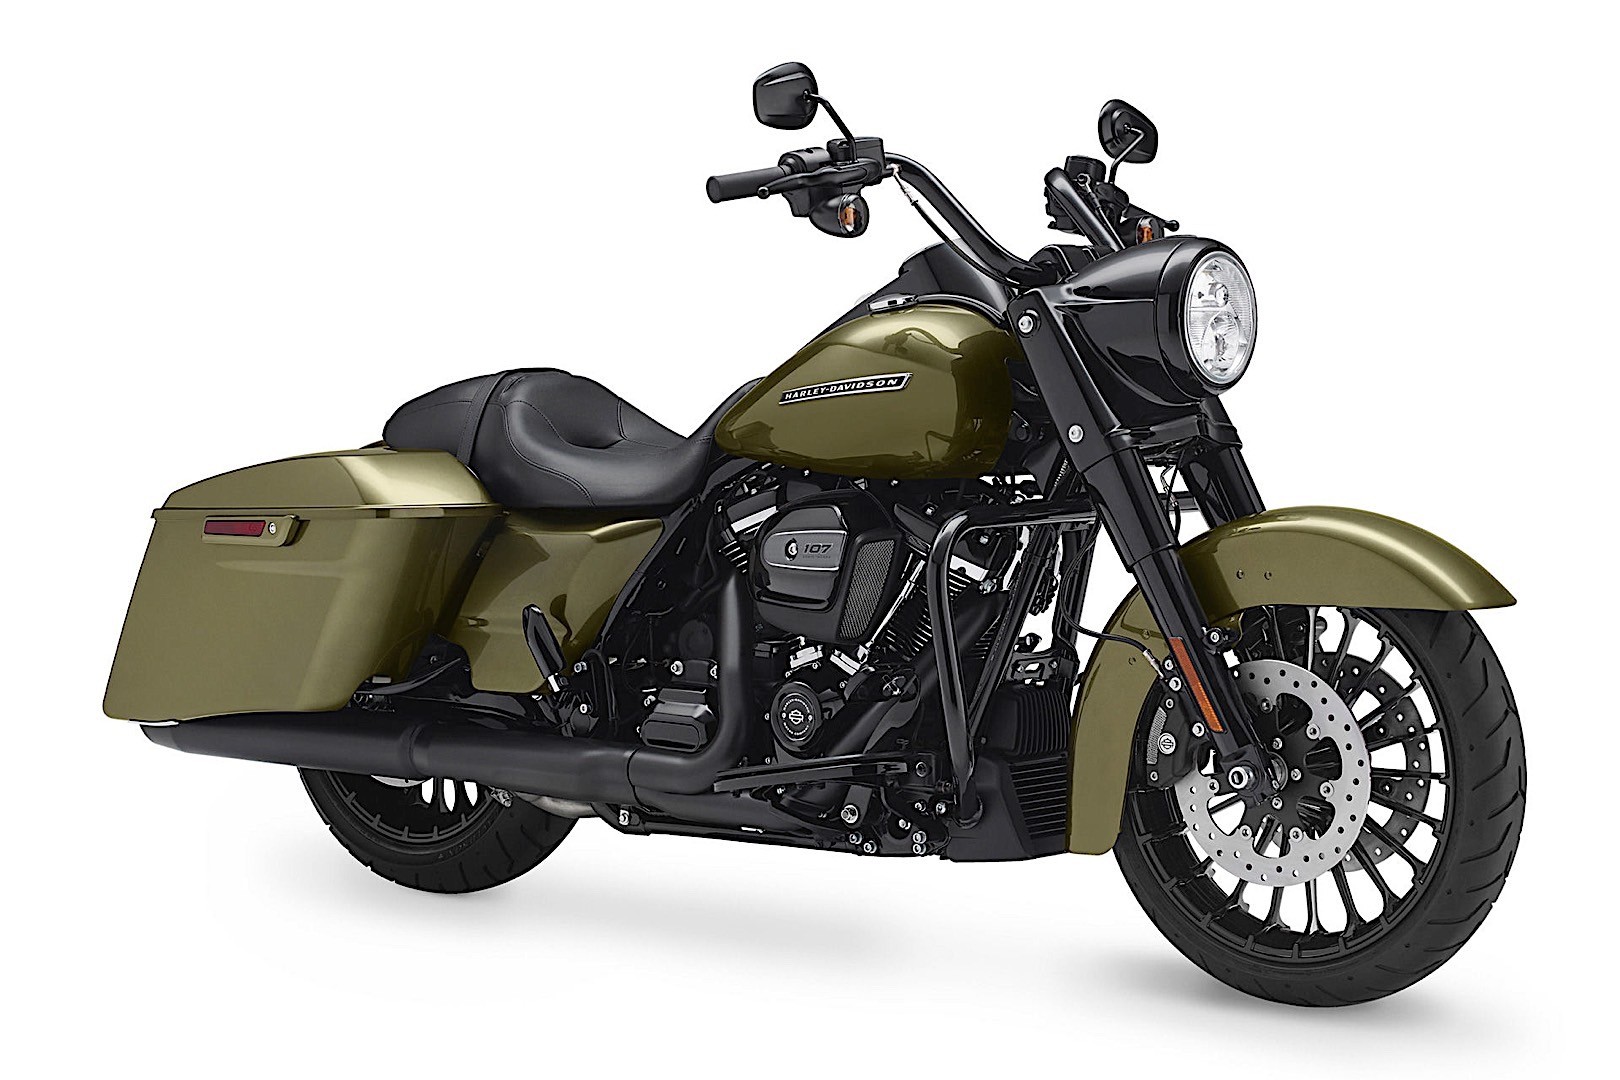  Harley  Davidson  Introduces 2019 Road King Special 